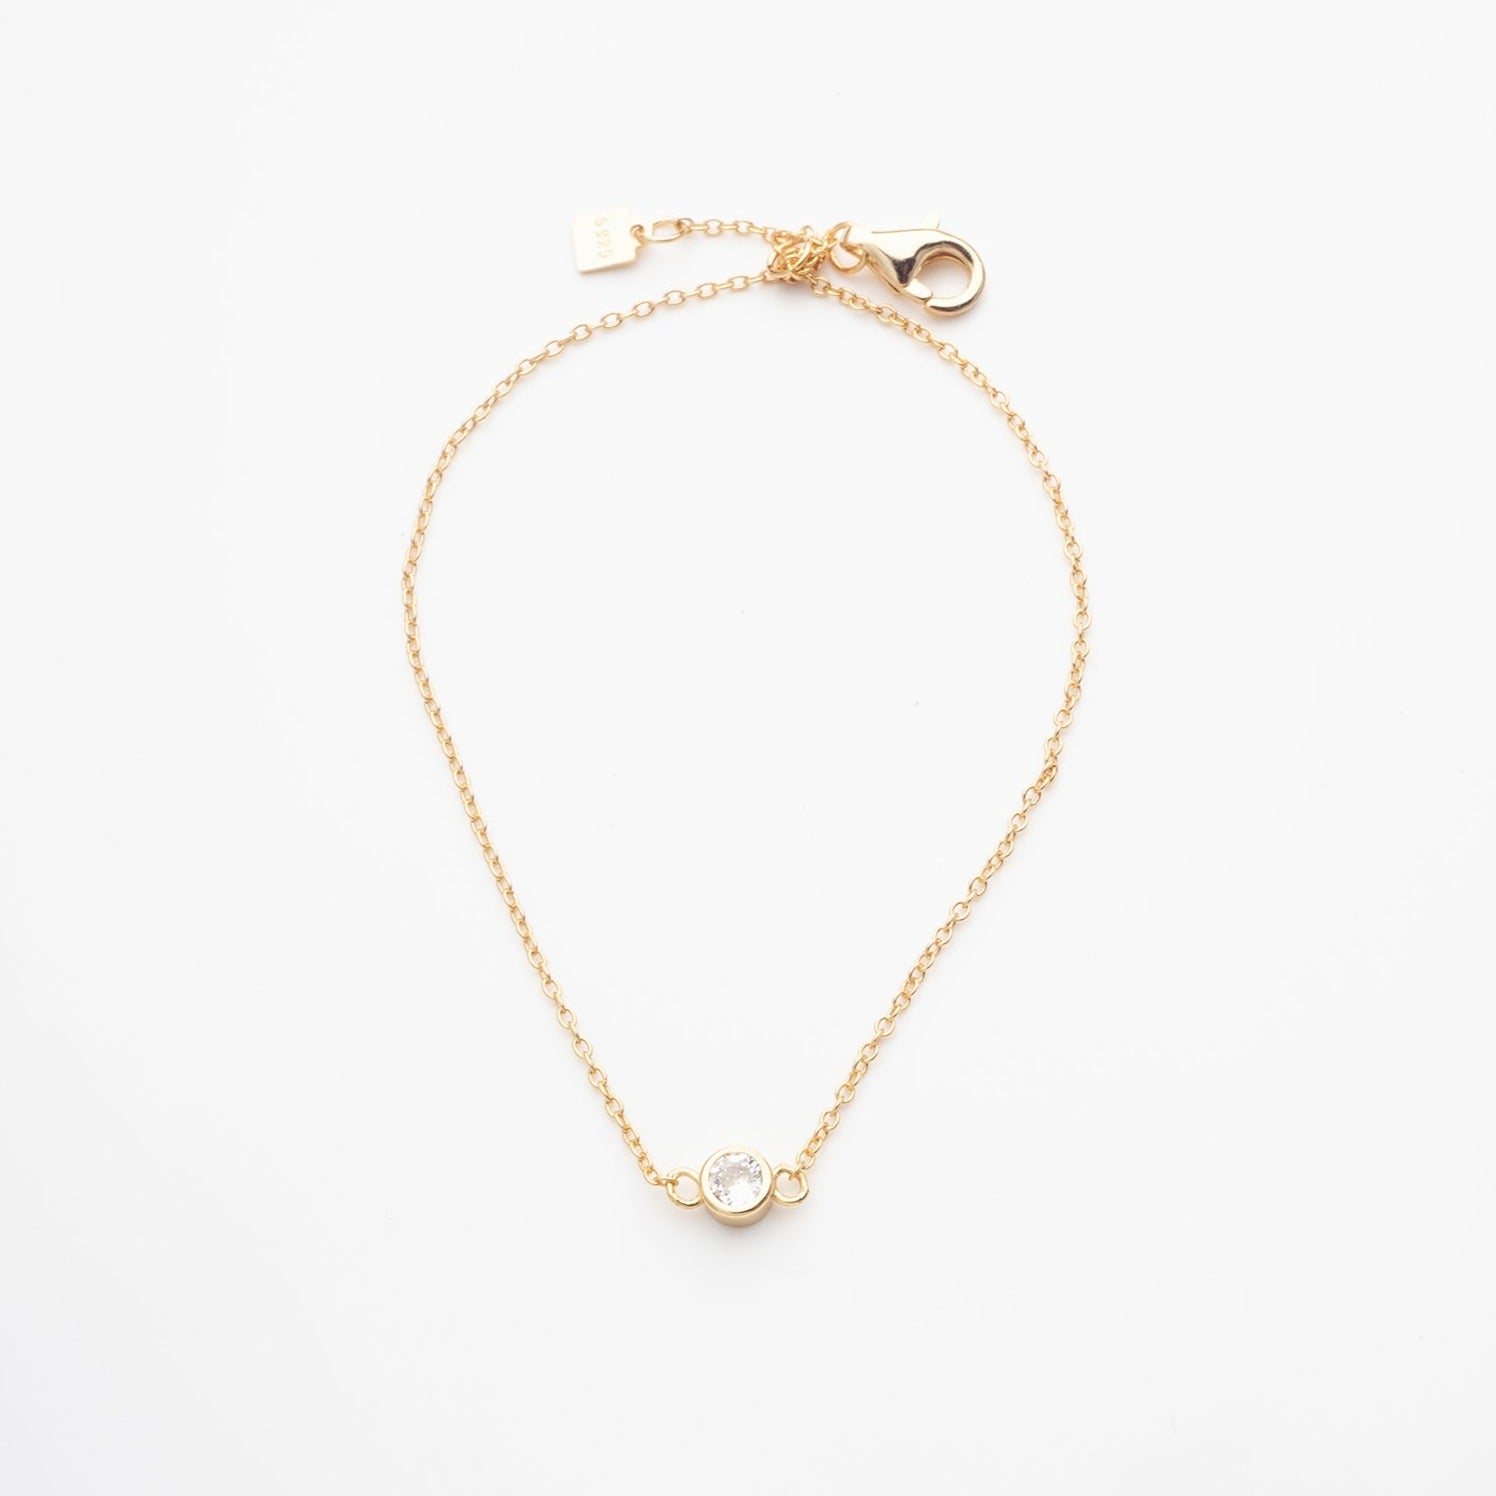 The Classic Bracelet in Gold